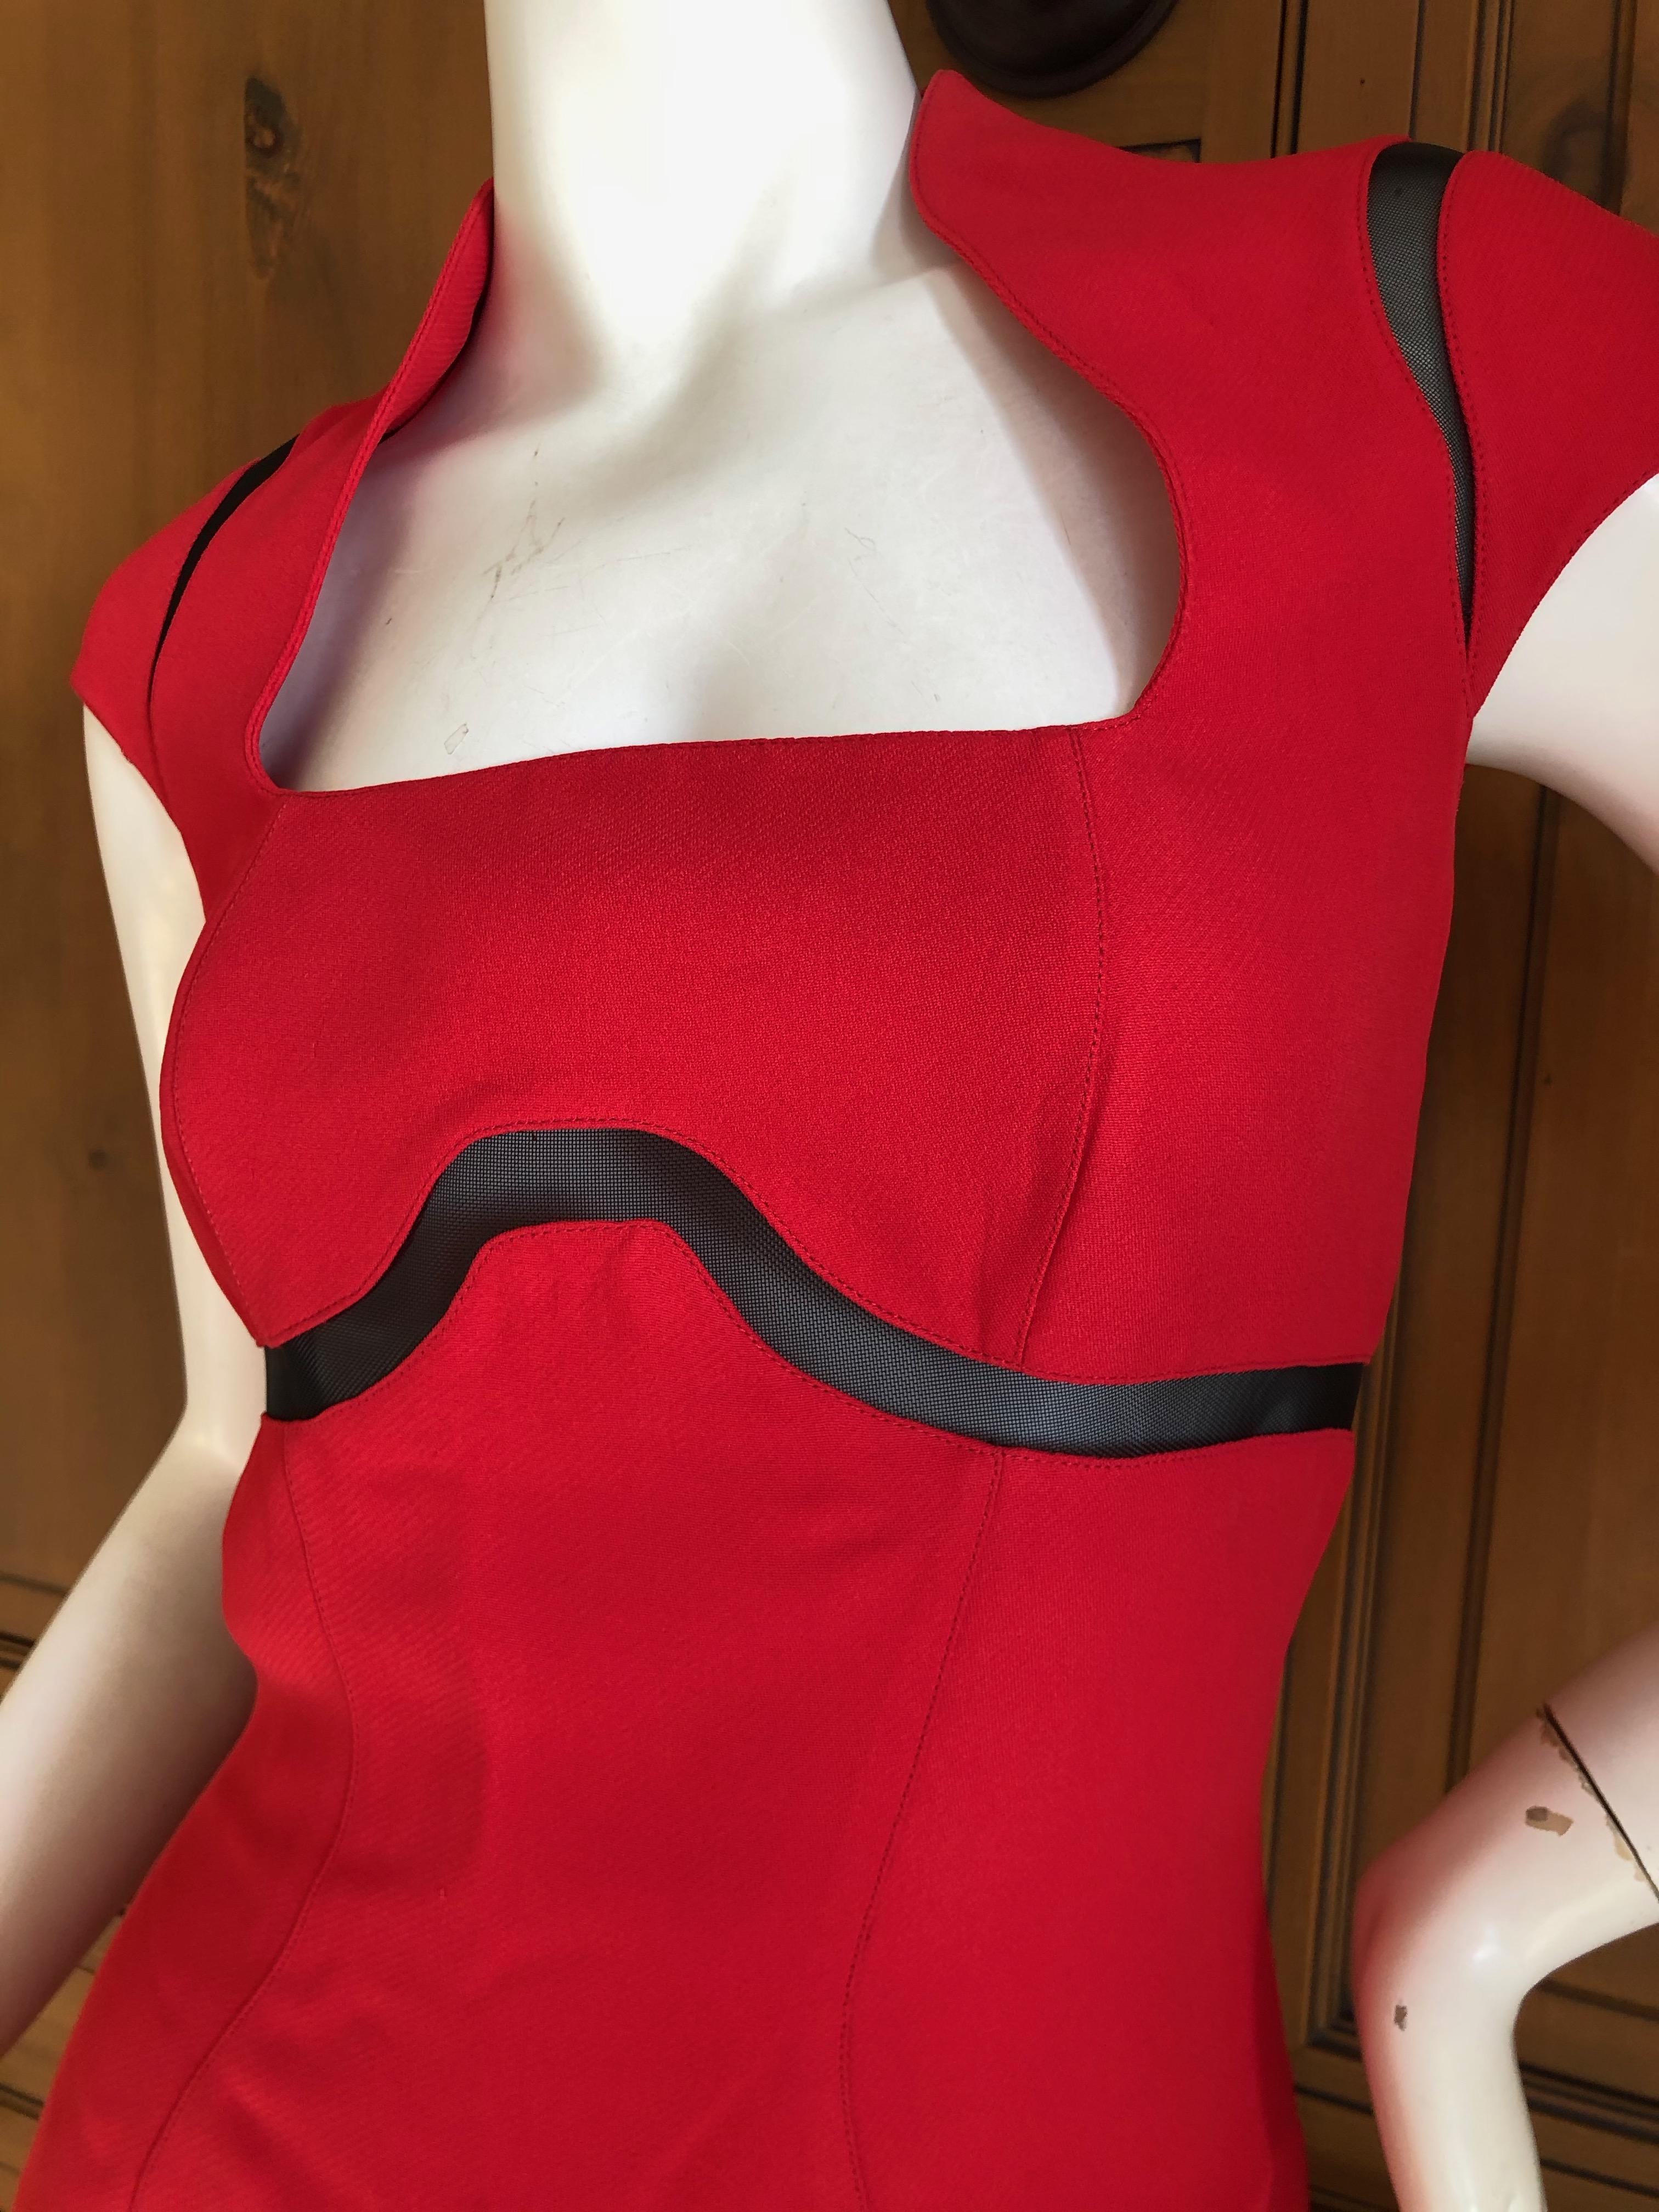 Thierry Mugler Vintage 1980's Red Cocktail Dress with Sheer Inserts For Sale 2